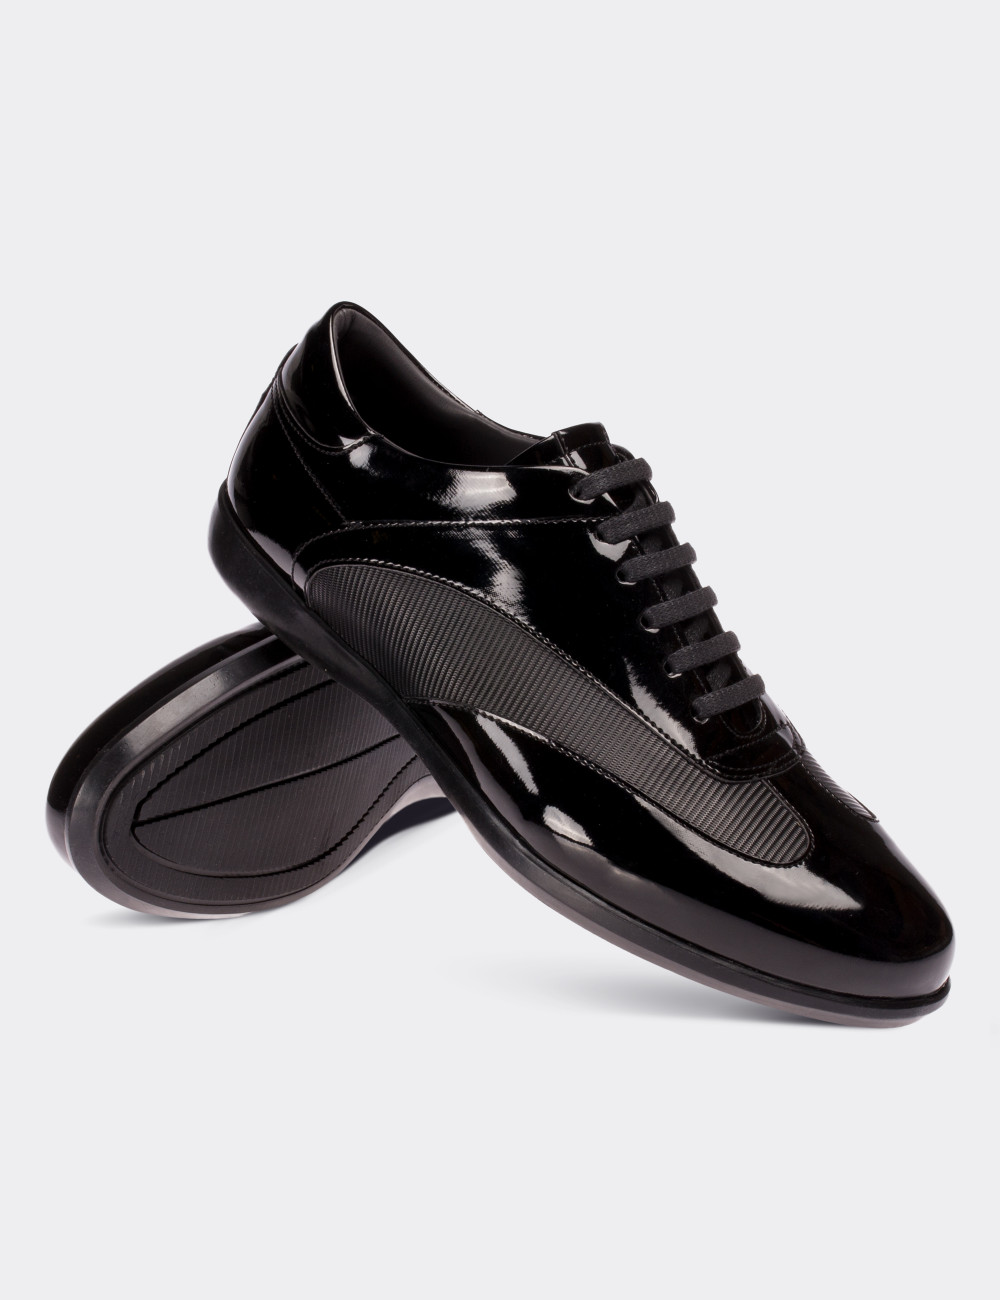 Black Patent Leather Lace-up Shoes - 01686MSYHC02